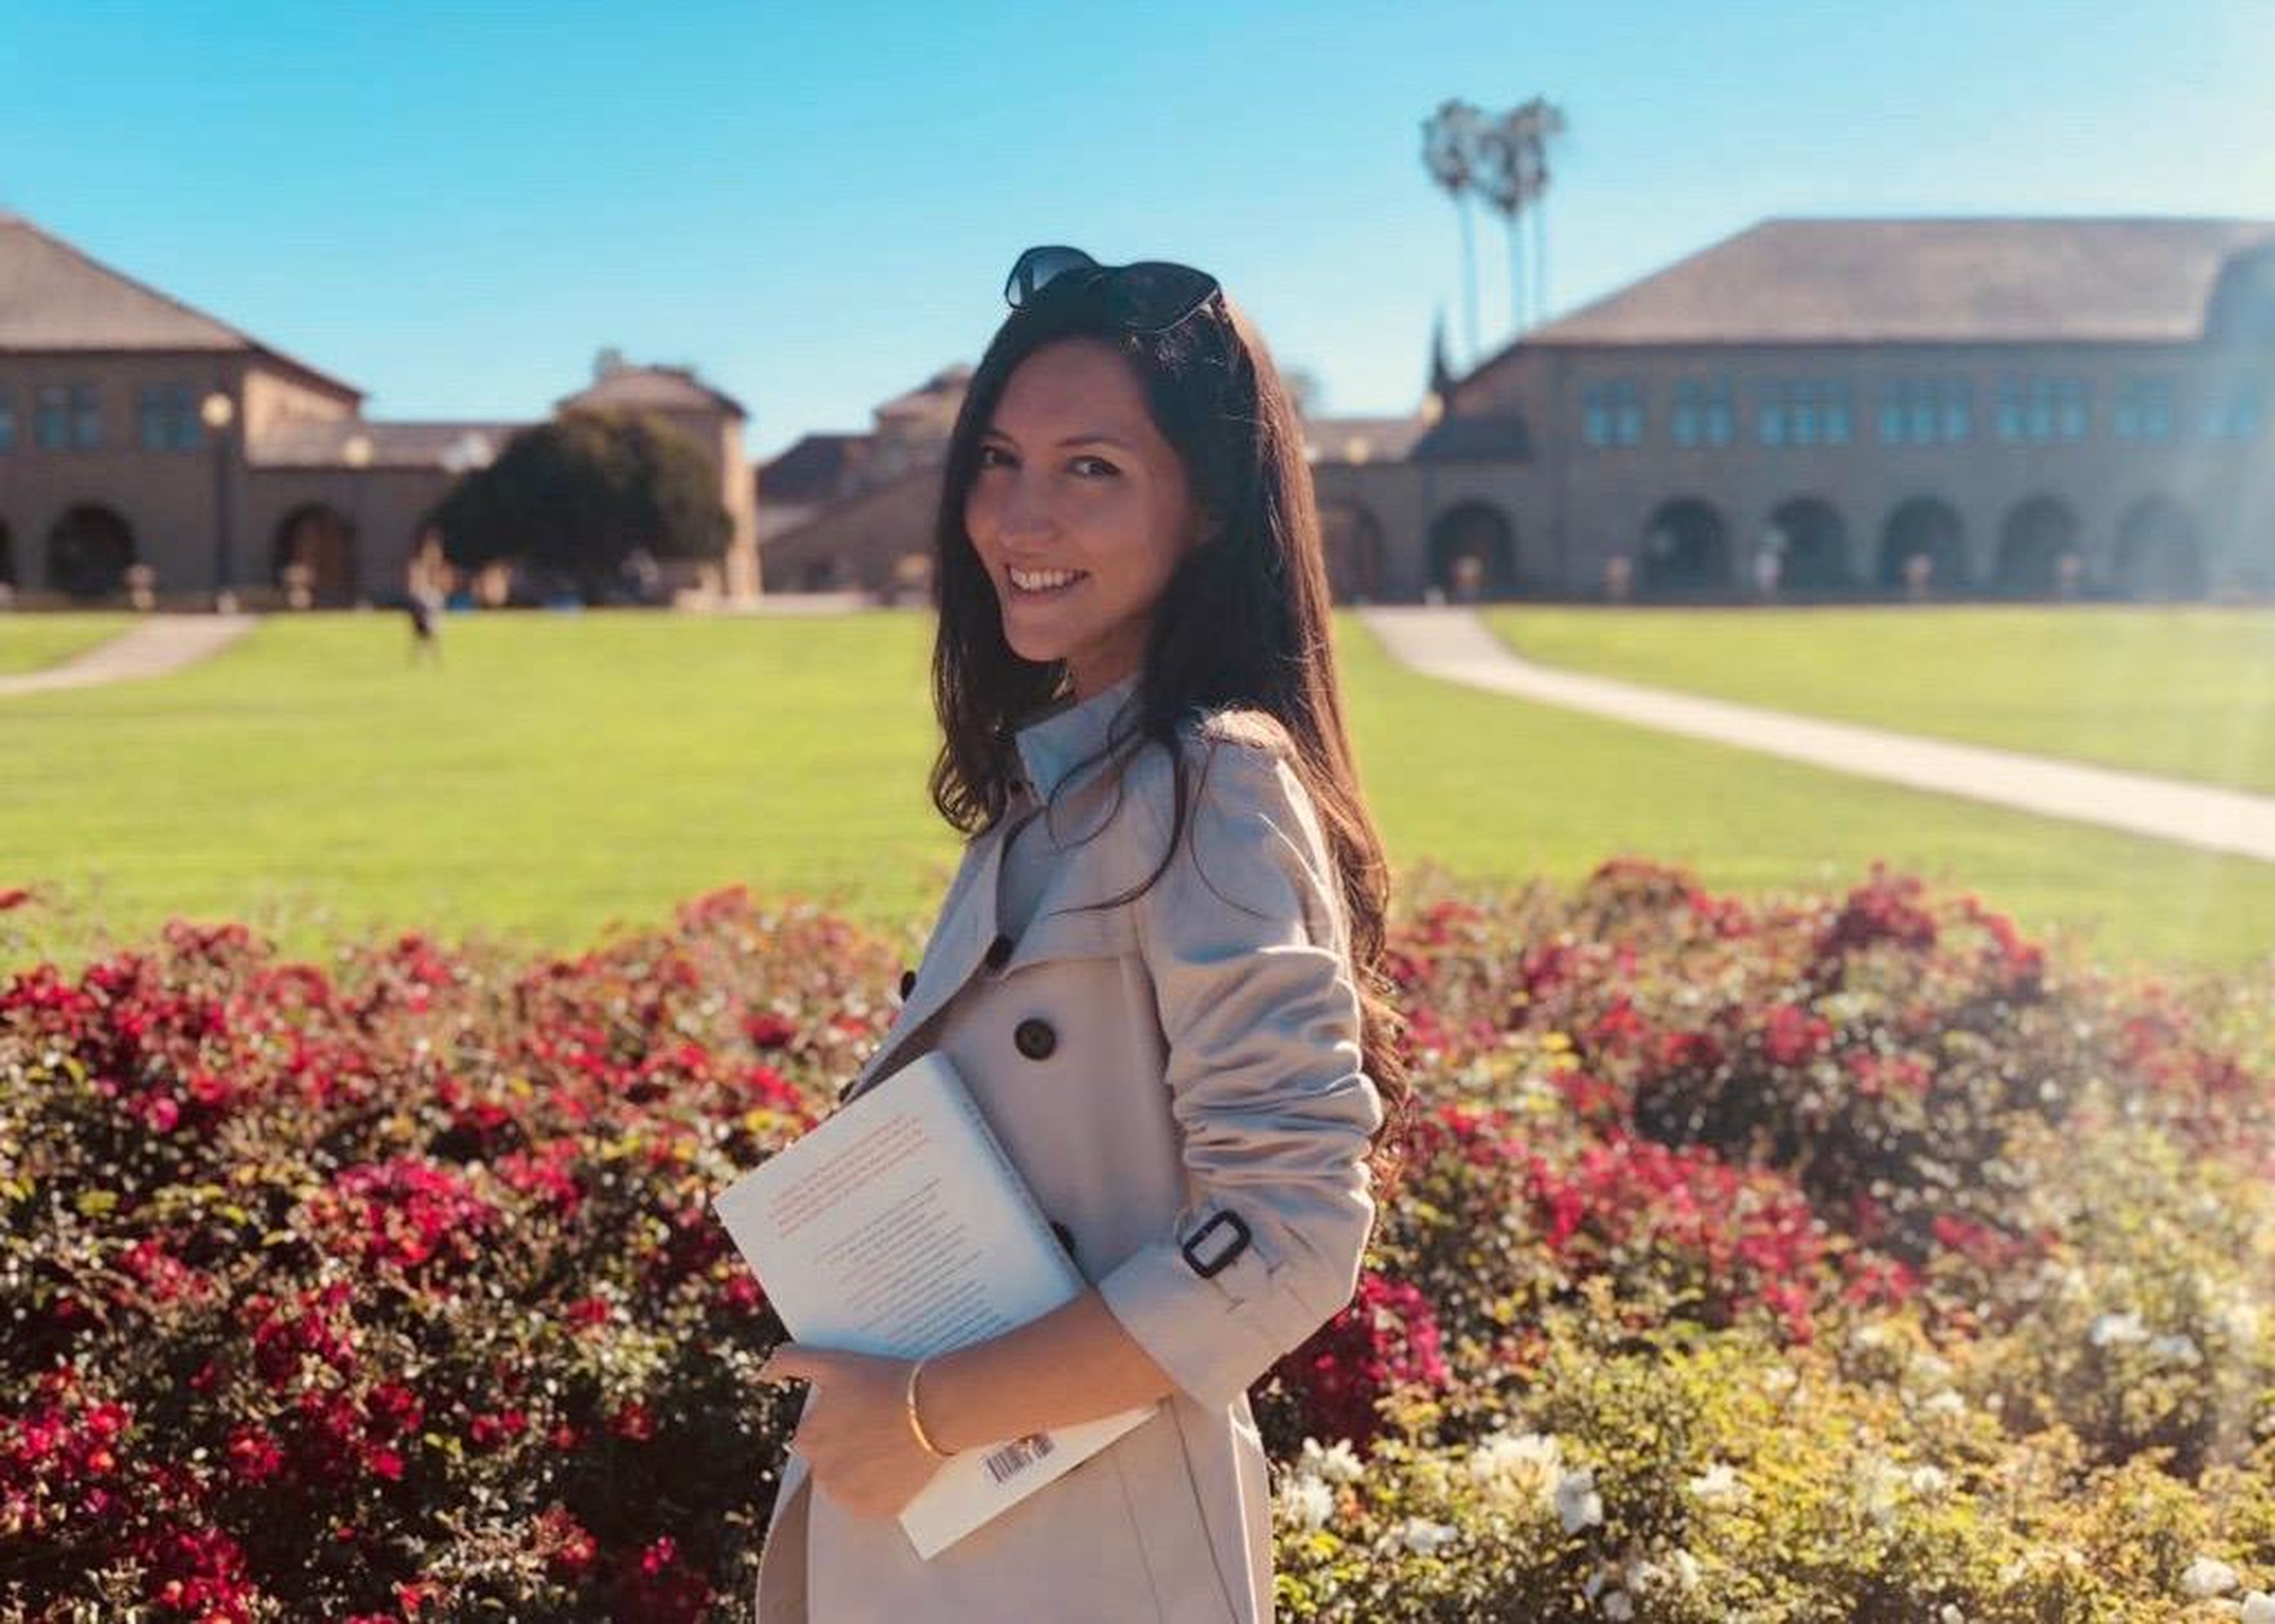 A day in the life of an HSBC exec who wakes up at 5:30 a.m. to work out, always eats green, and studies at Stanford in her free time